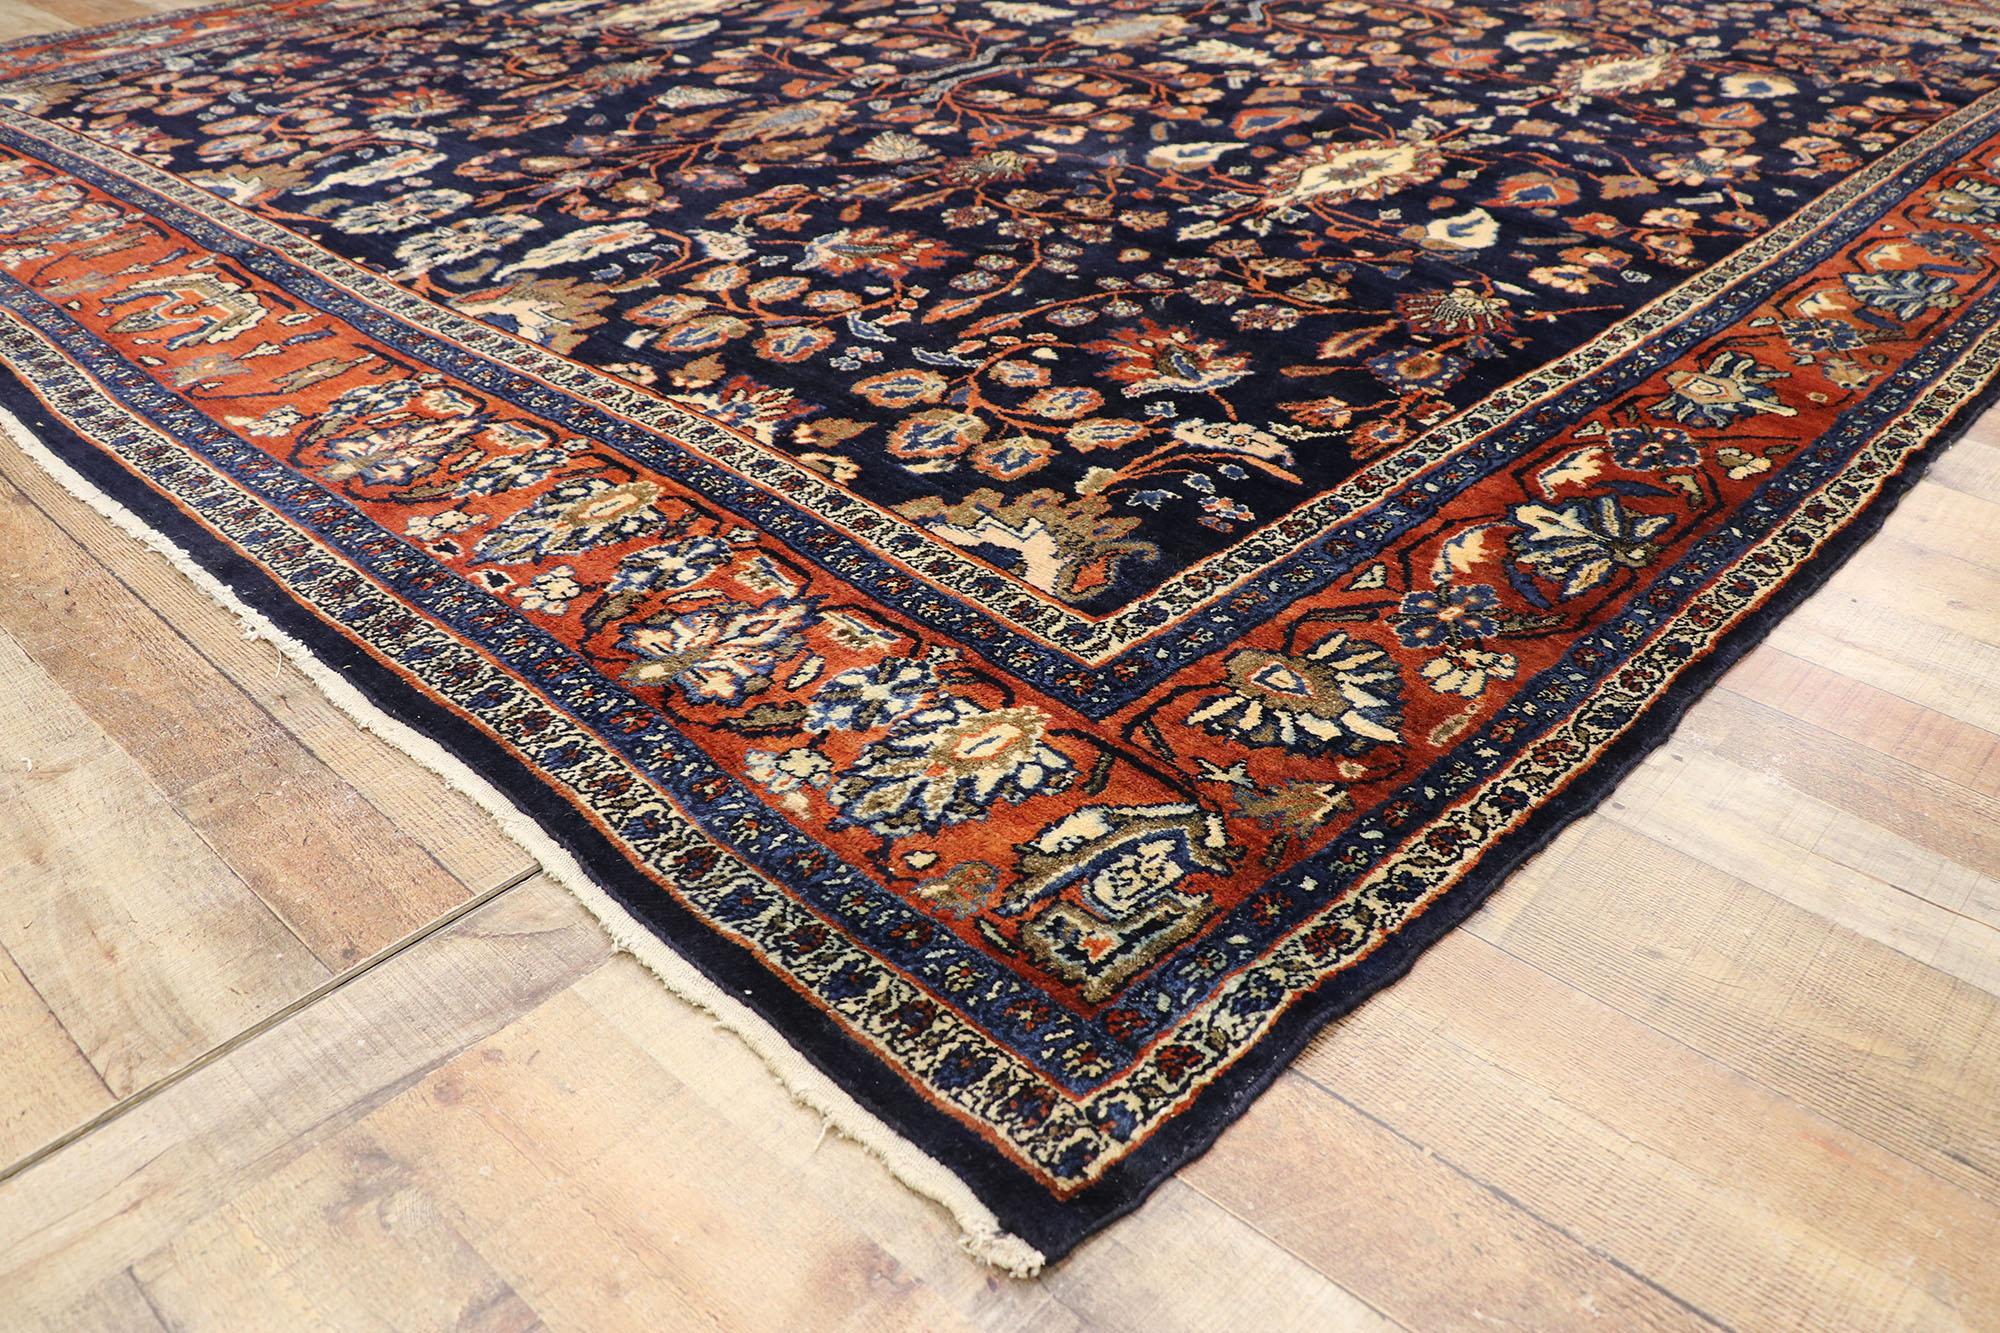 Antique Persian Bibikabad Rug with Old World French Chateau Style In Good Condition For Sale In Dallas, TX